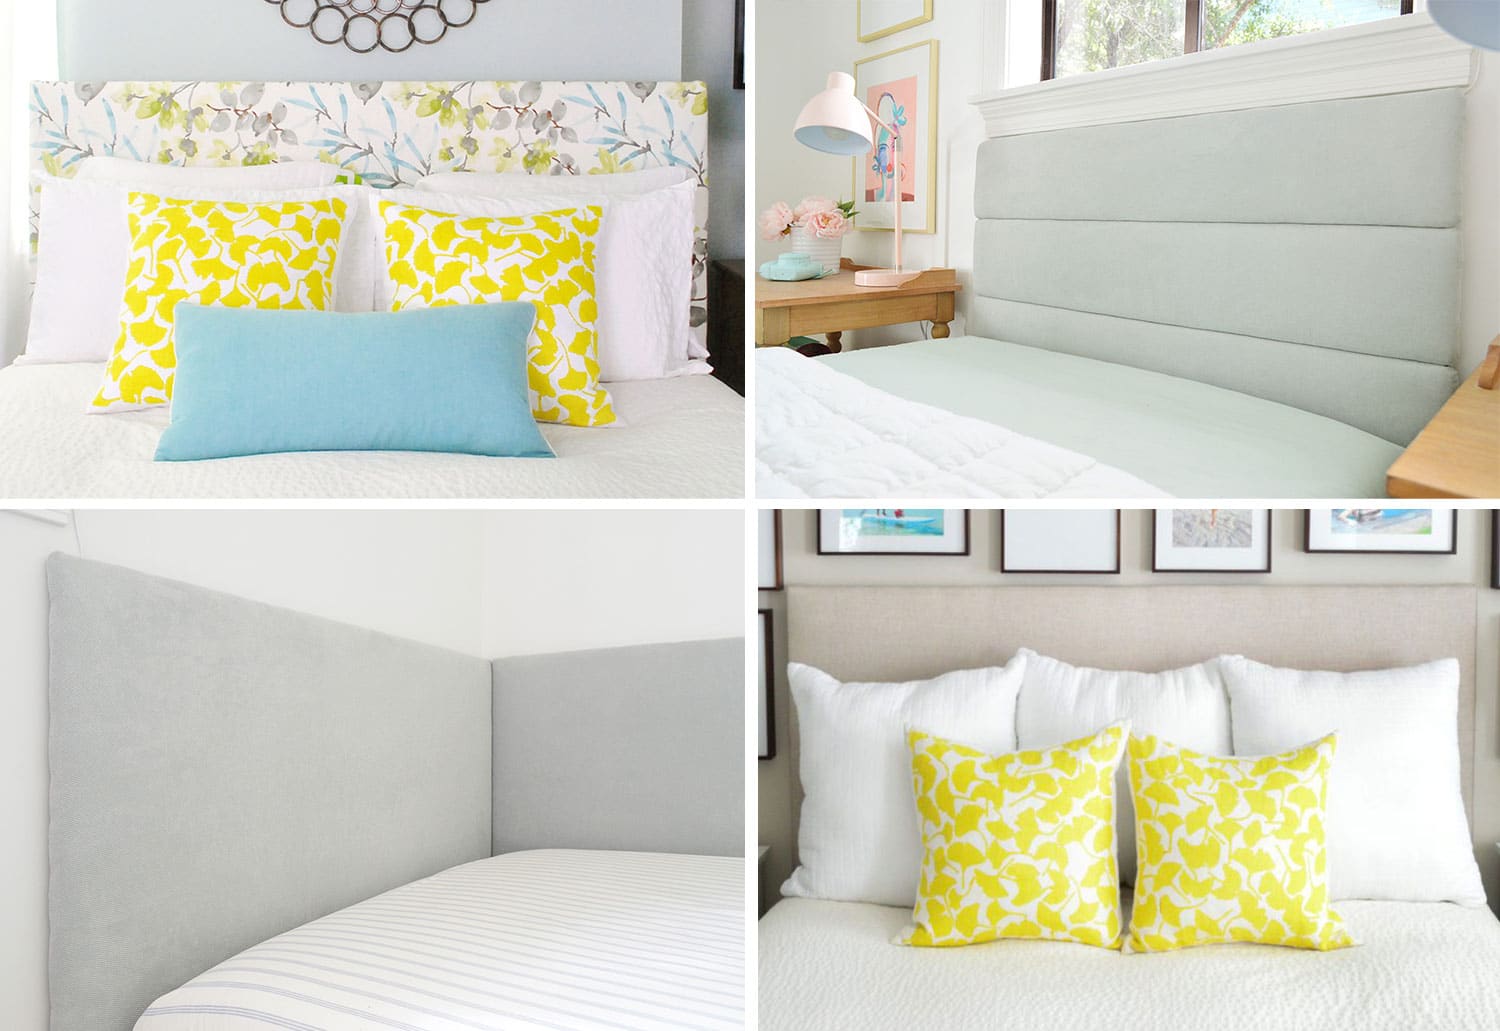 Grid of upholstered headboard project ideas